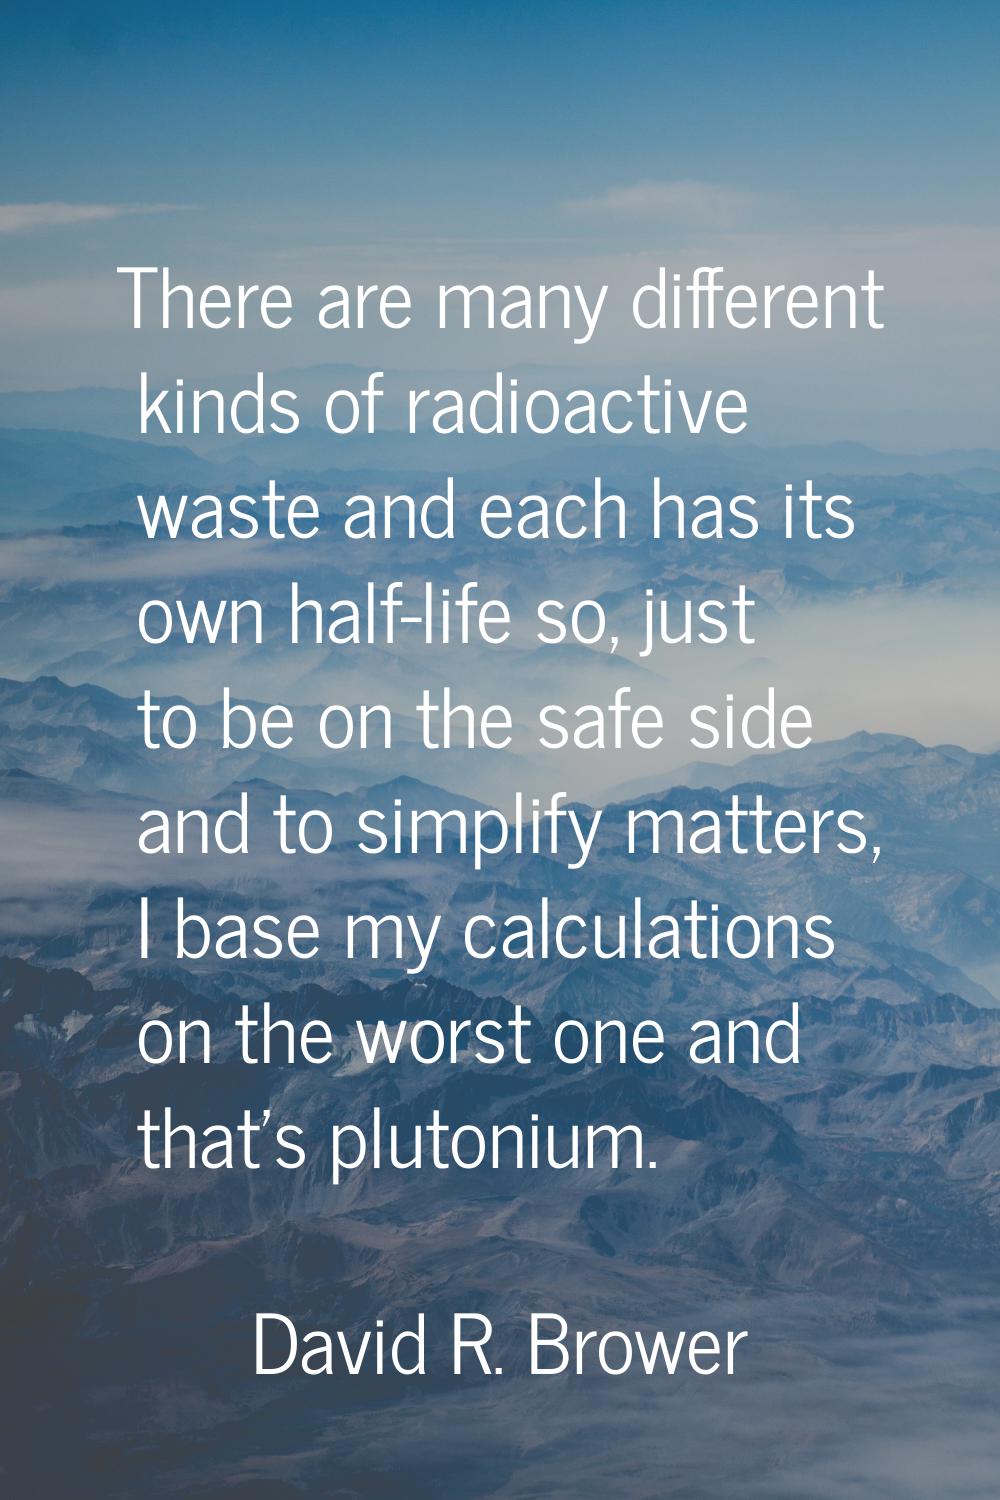 There are many different kinds of radioactive waste and each has its own half-life so, just to be o